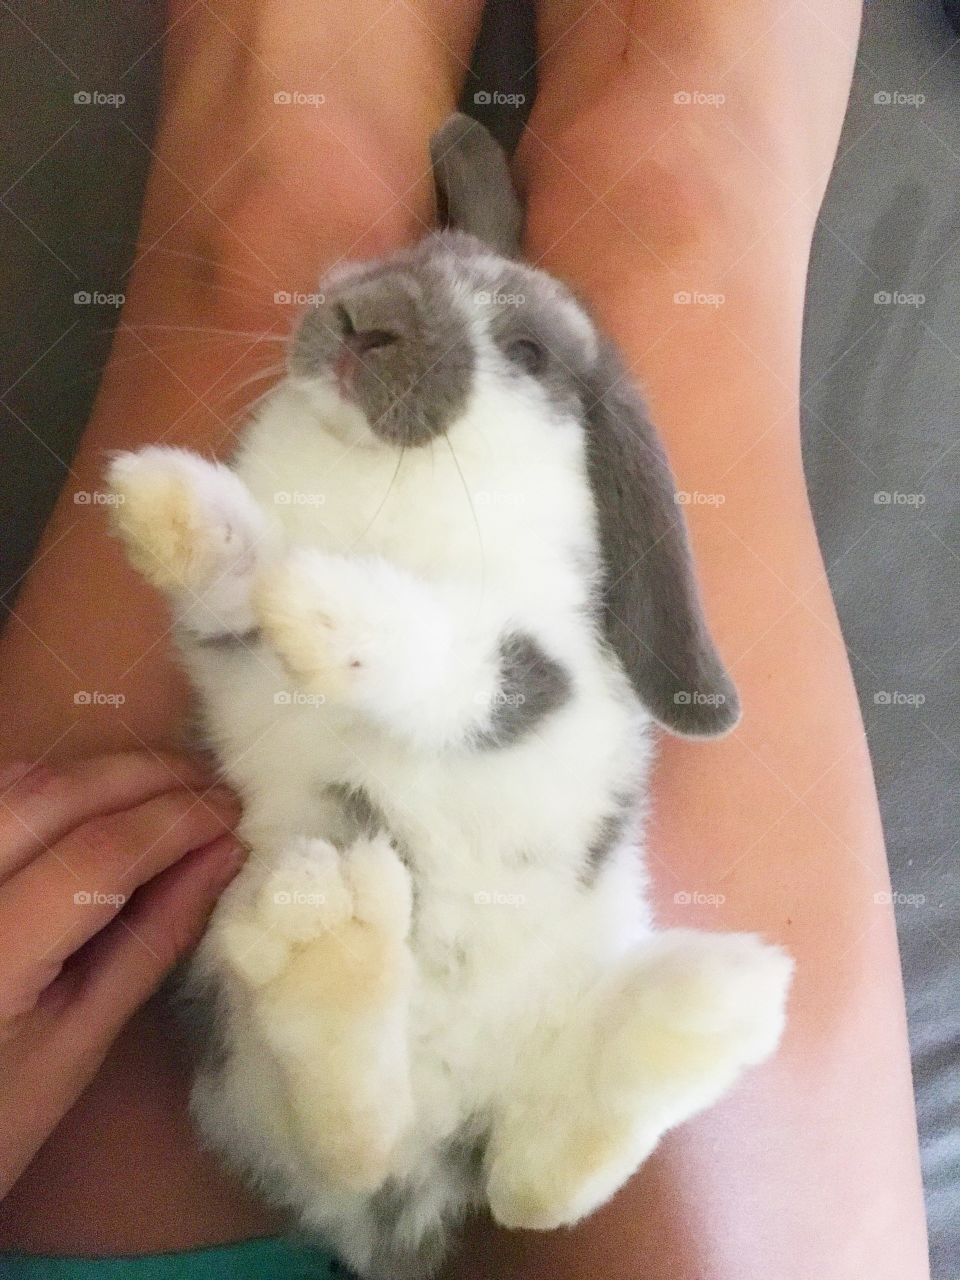 Thumper loves his belly rubbed! 